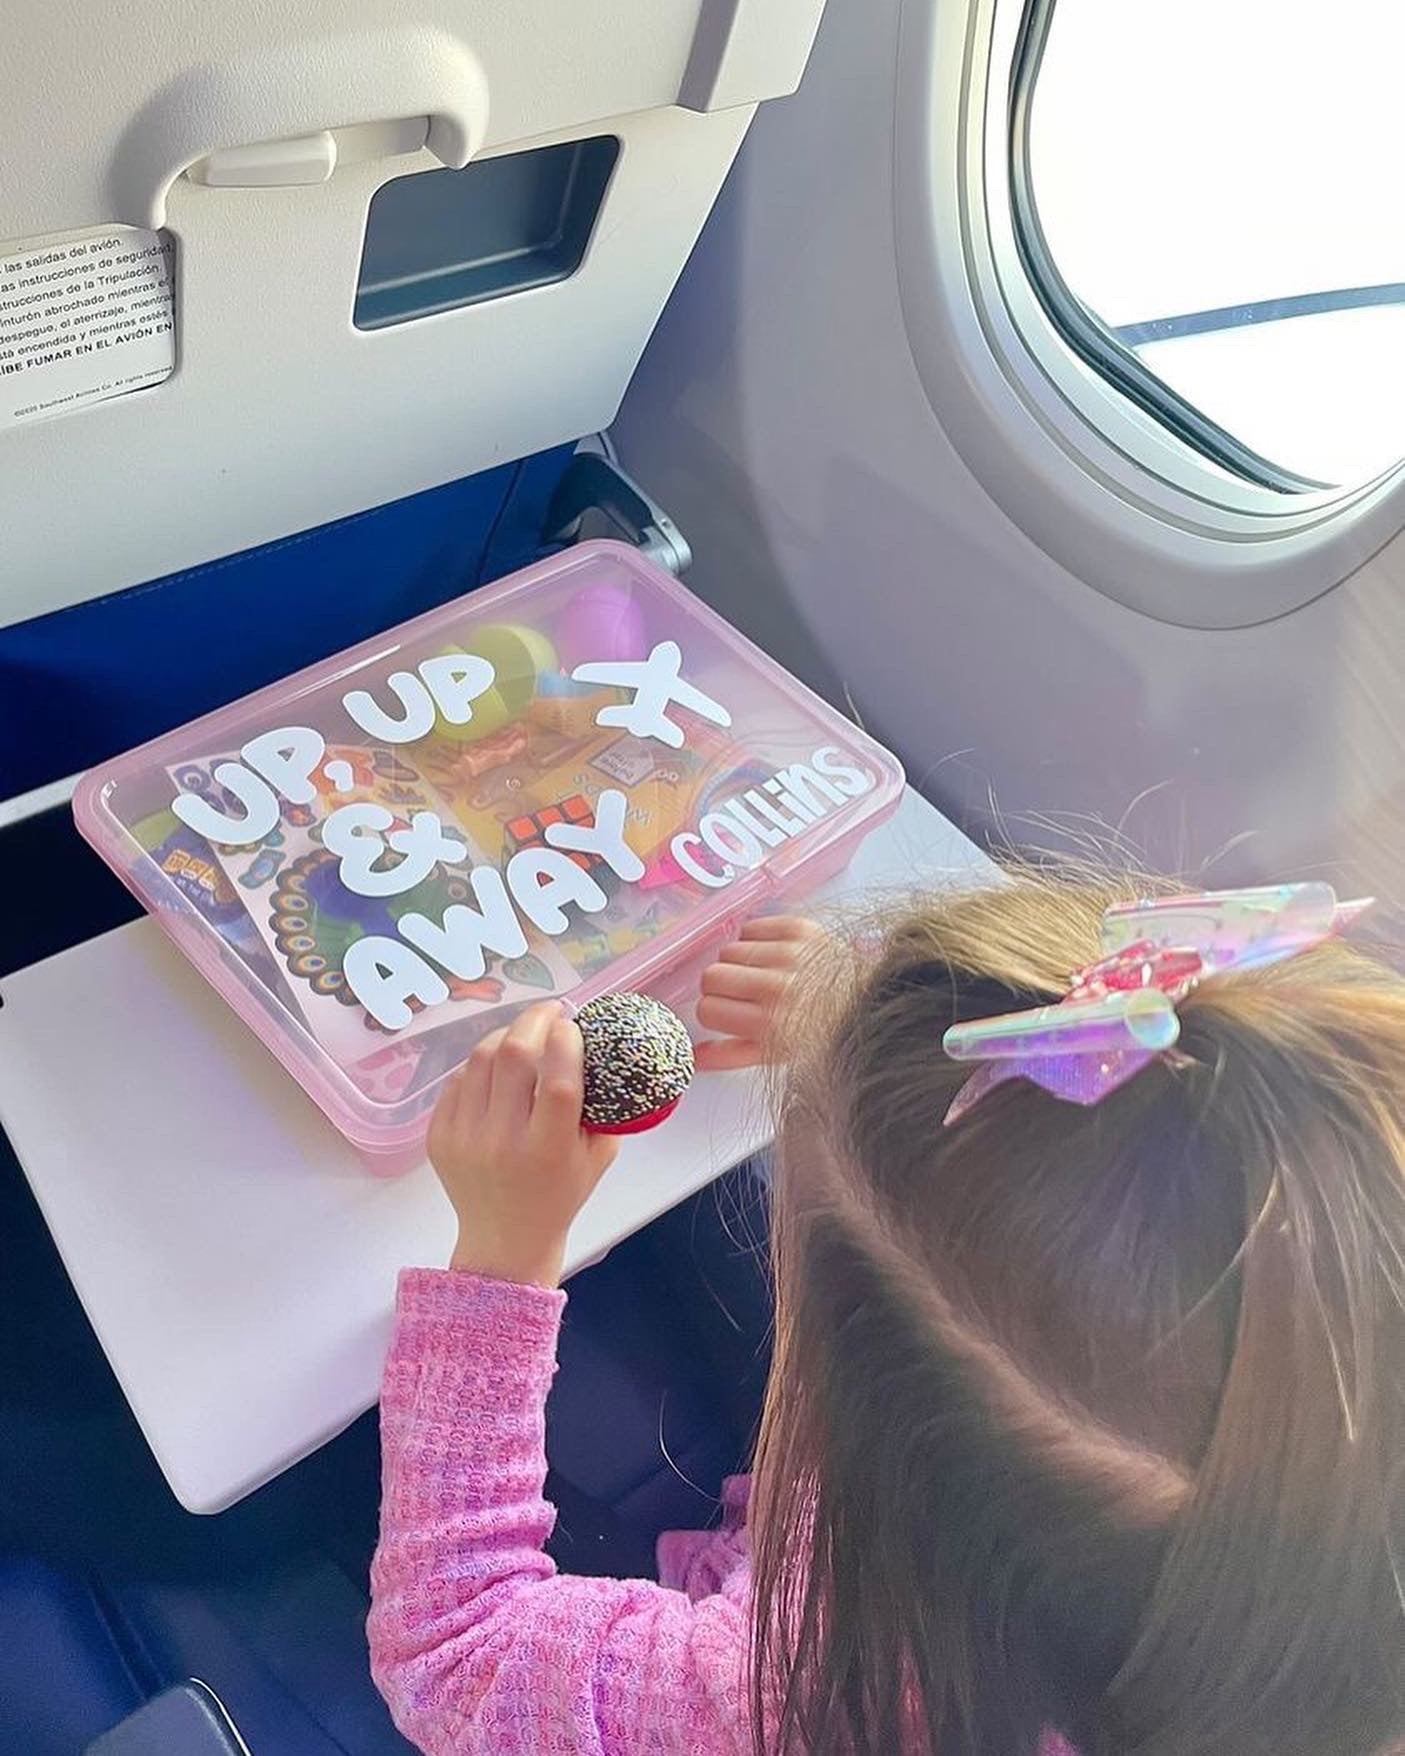 The Best Airplane Activities for Kids + Airplane Toys for Toddlers